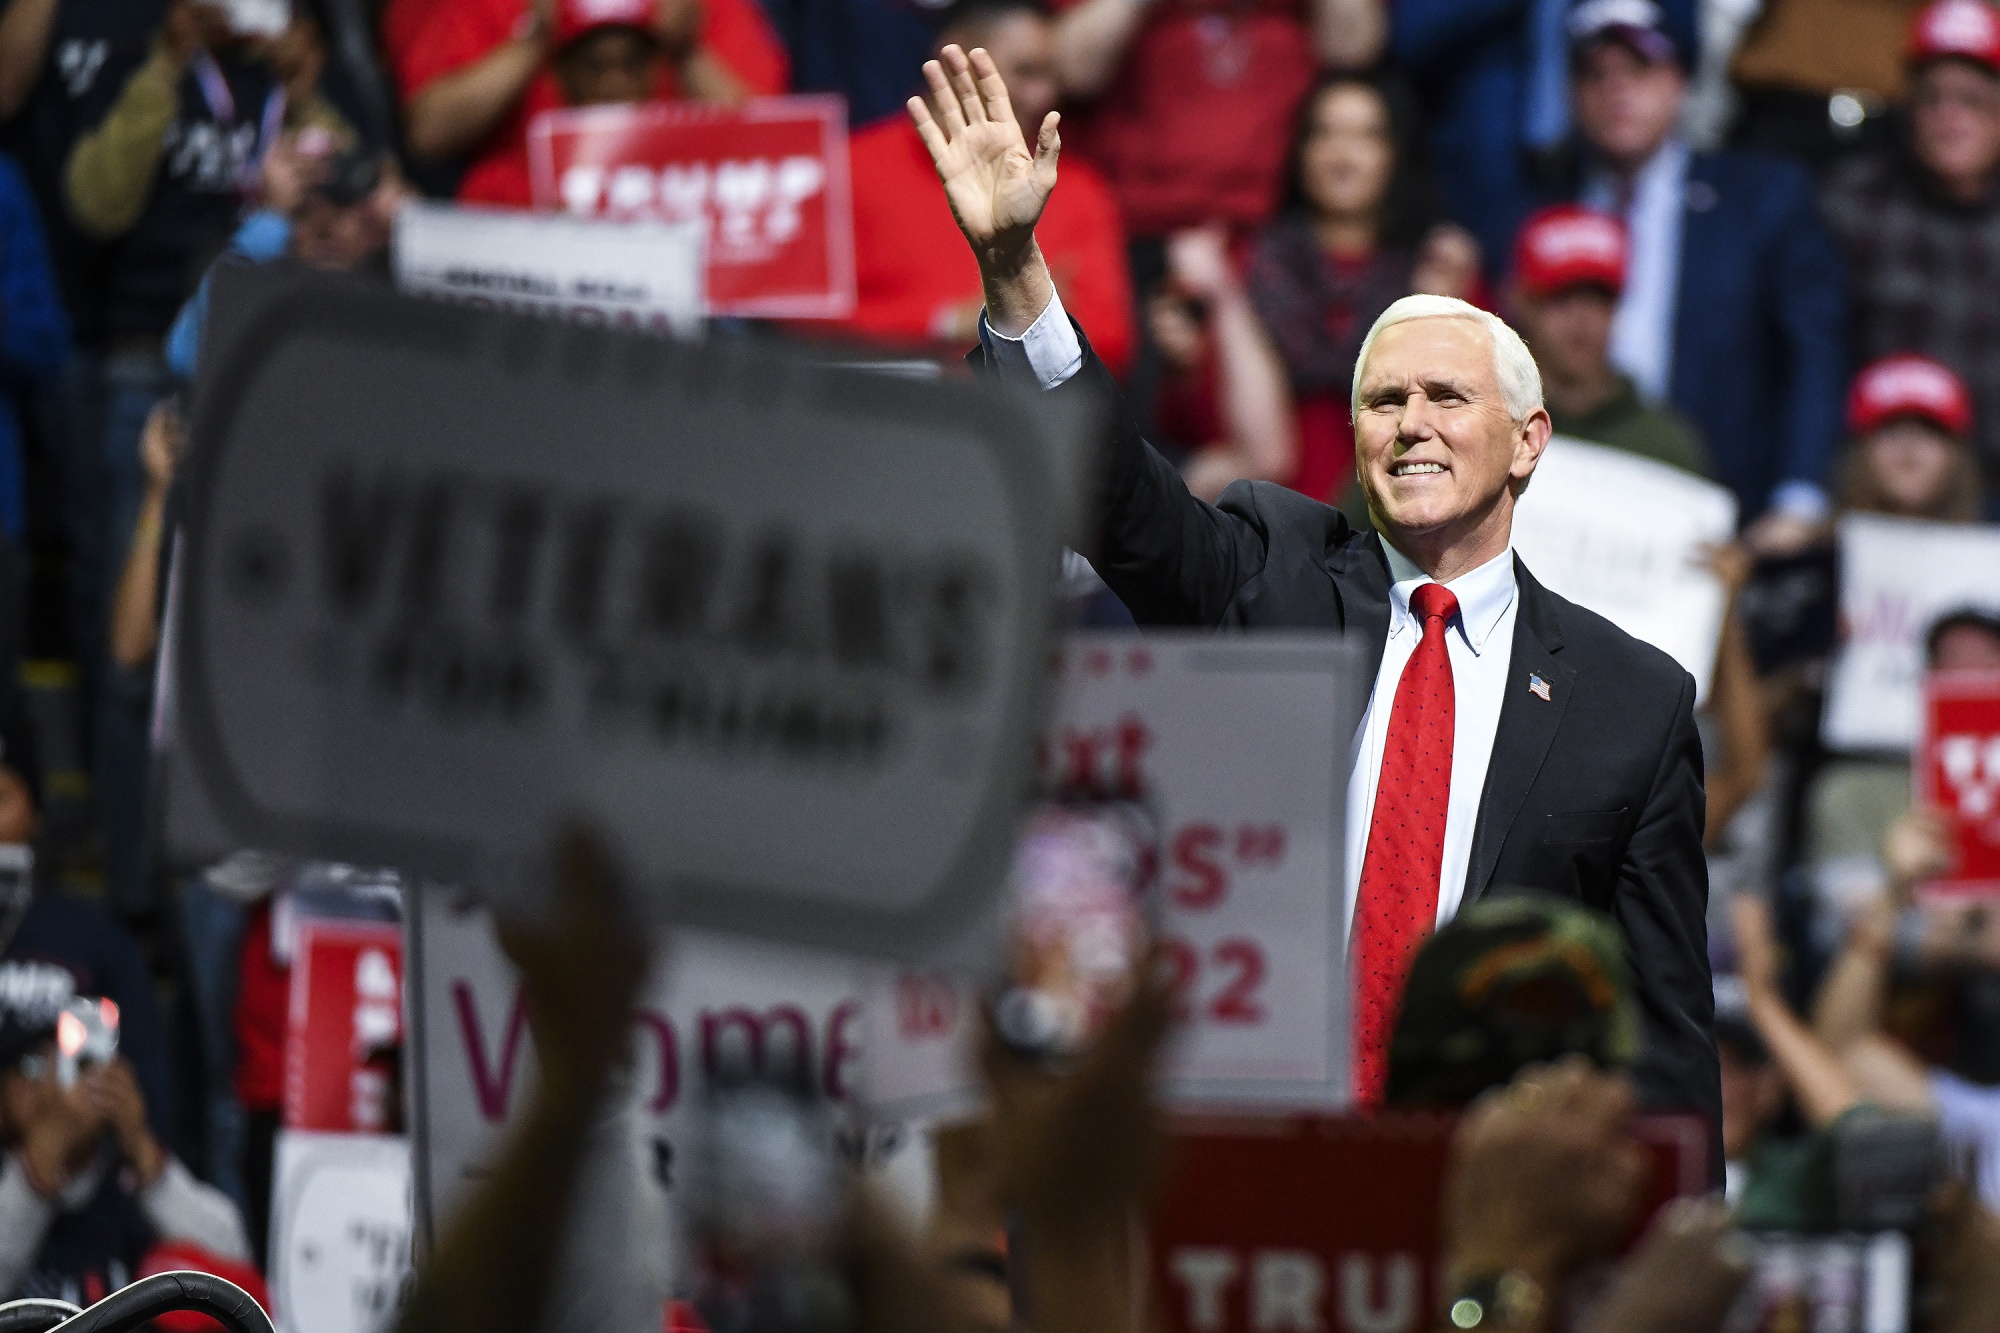 Mike Pence’s 2024 Presidential Campaign Has Already Begun Bloomberg